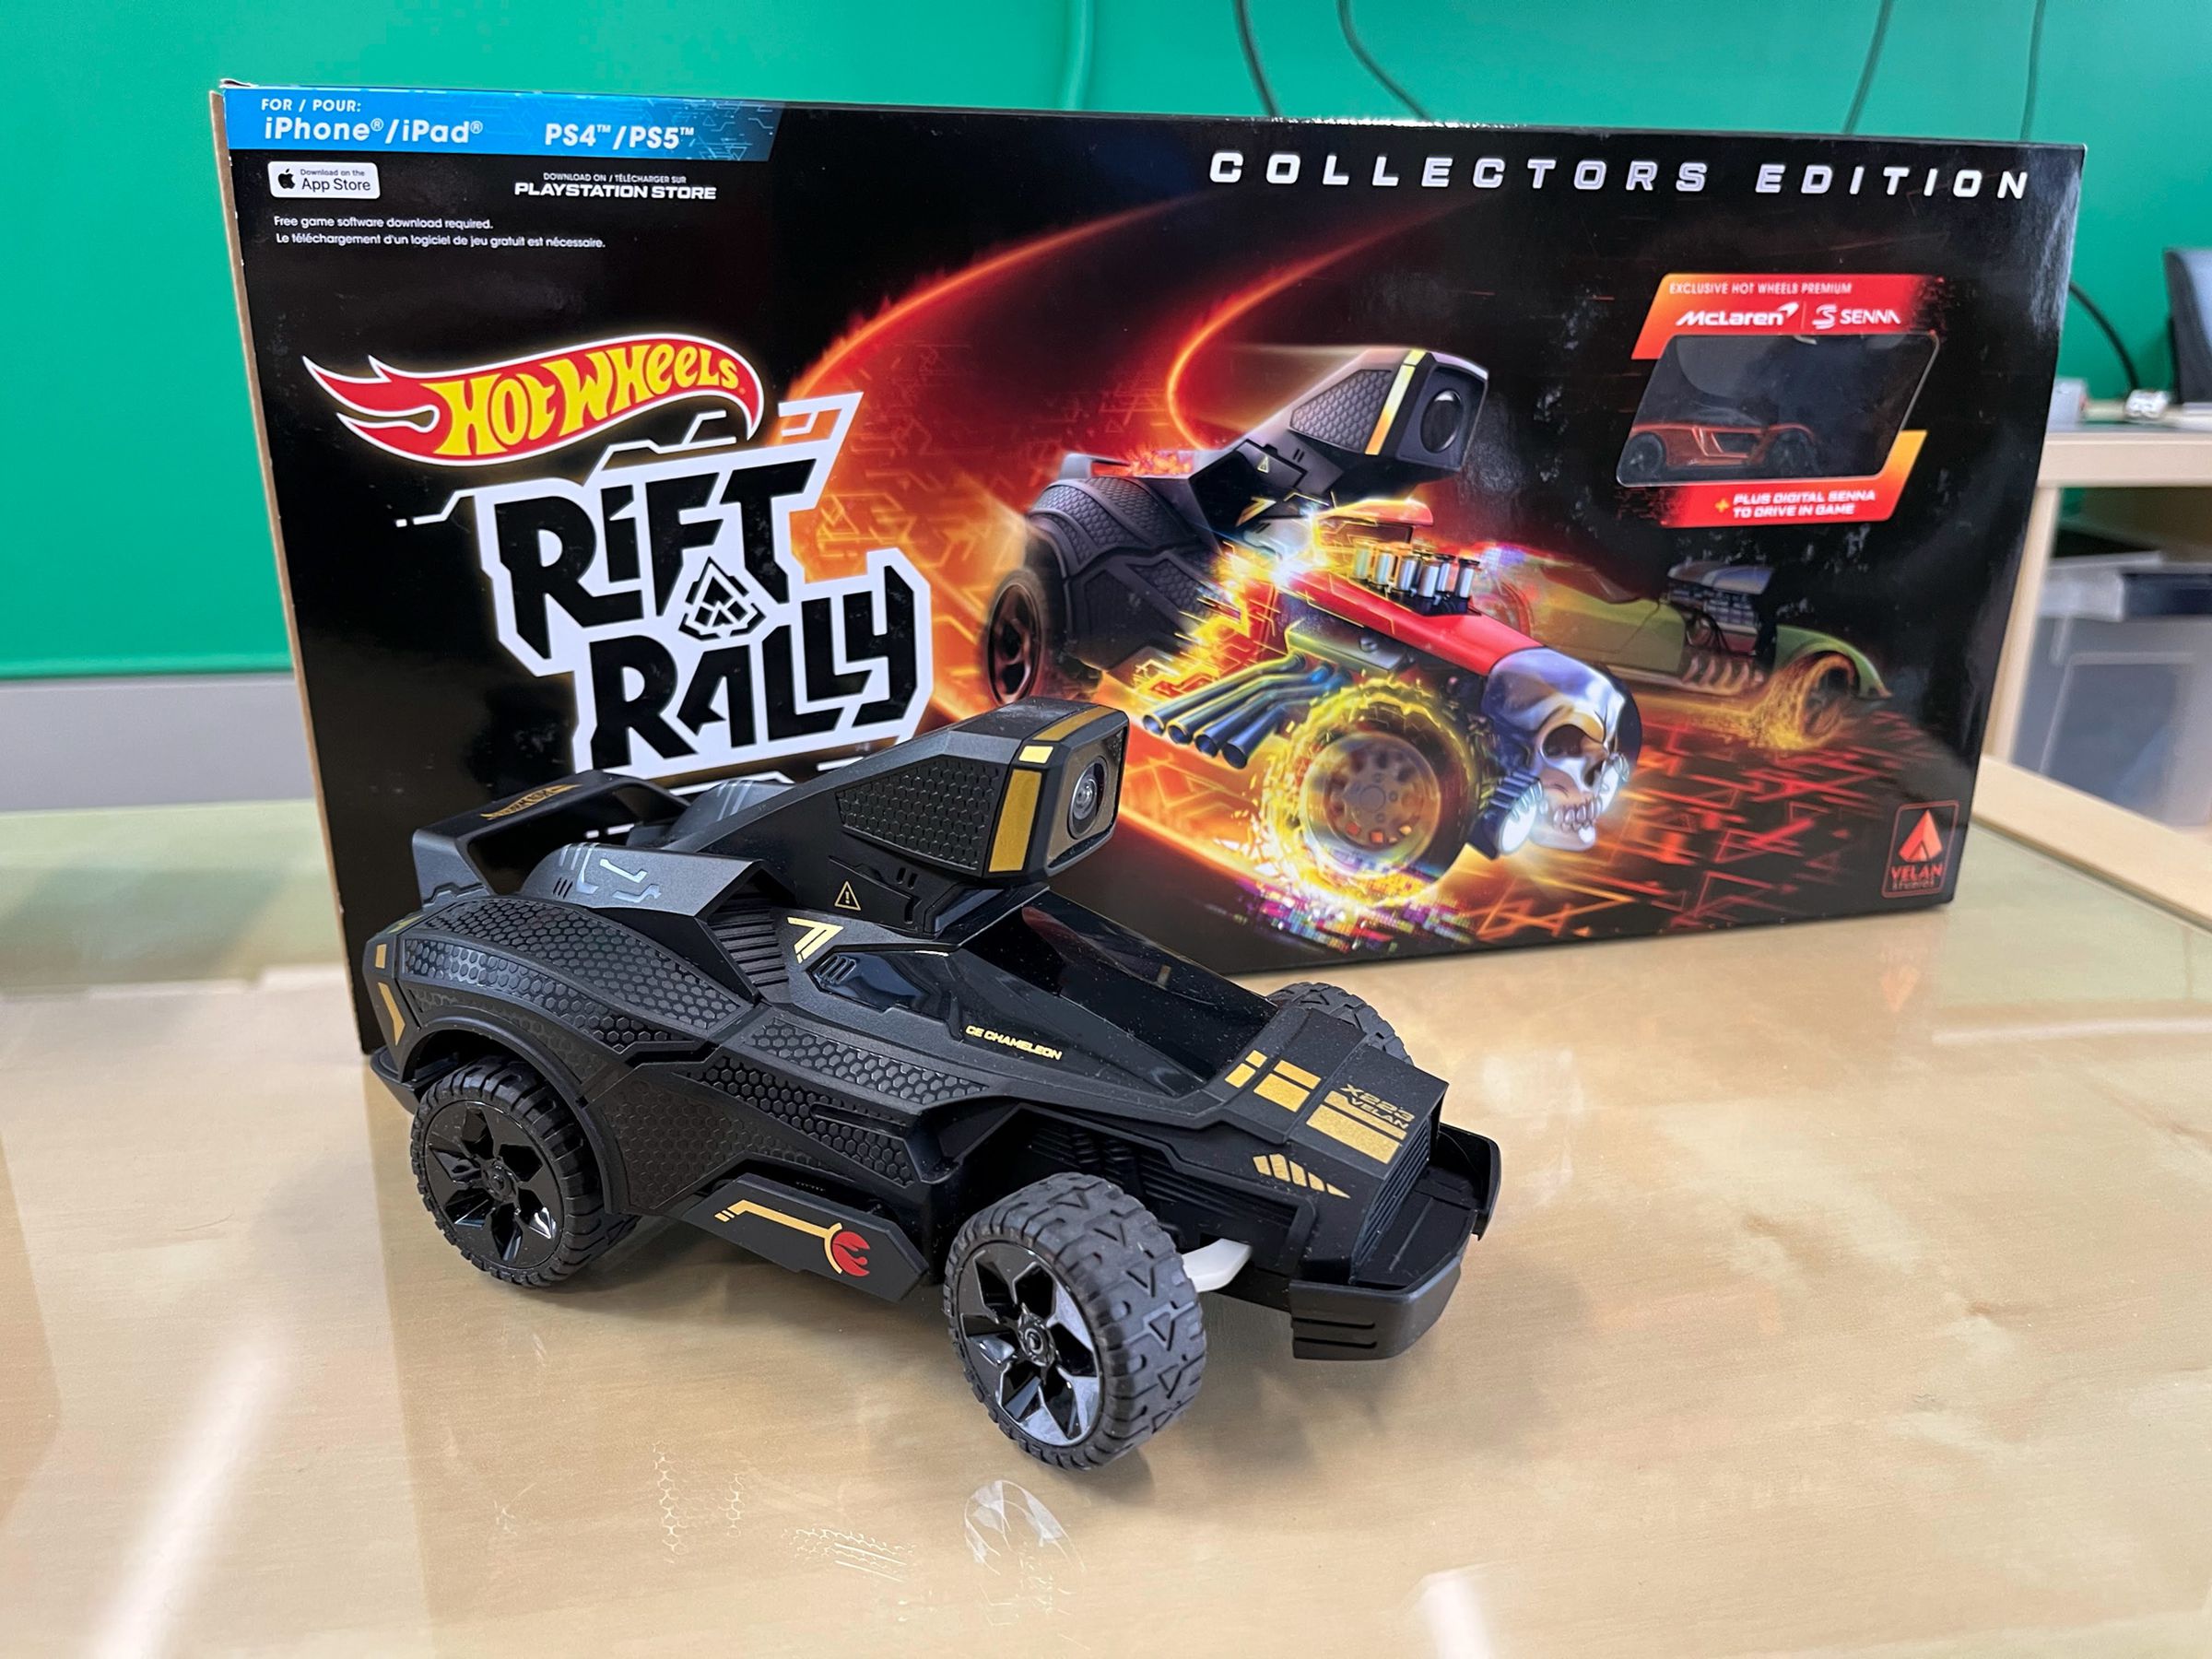 The $150 Collectors Edition comes with this black car and an exclusive Hot Wheels McLaren. The regular car is white.